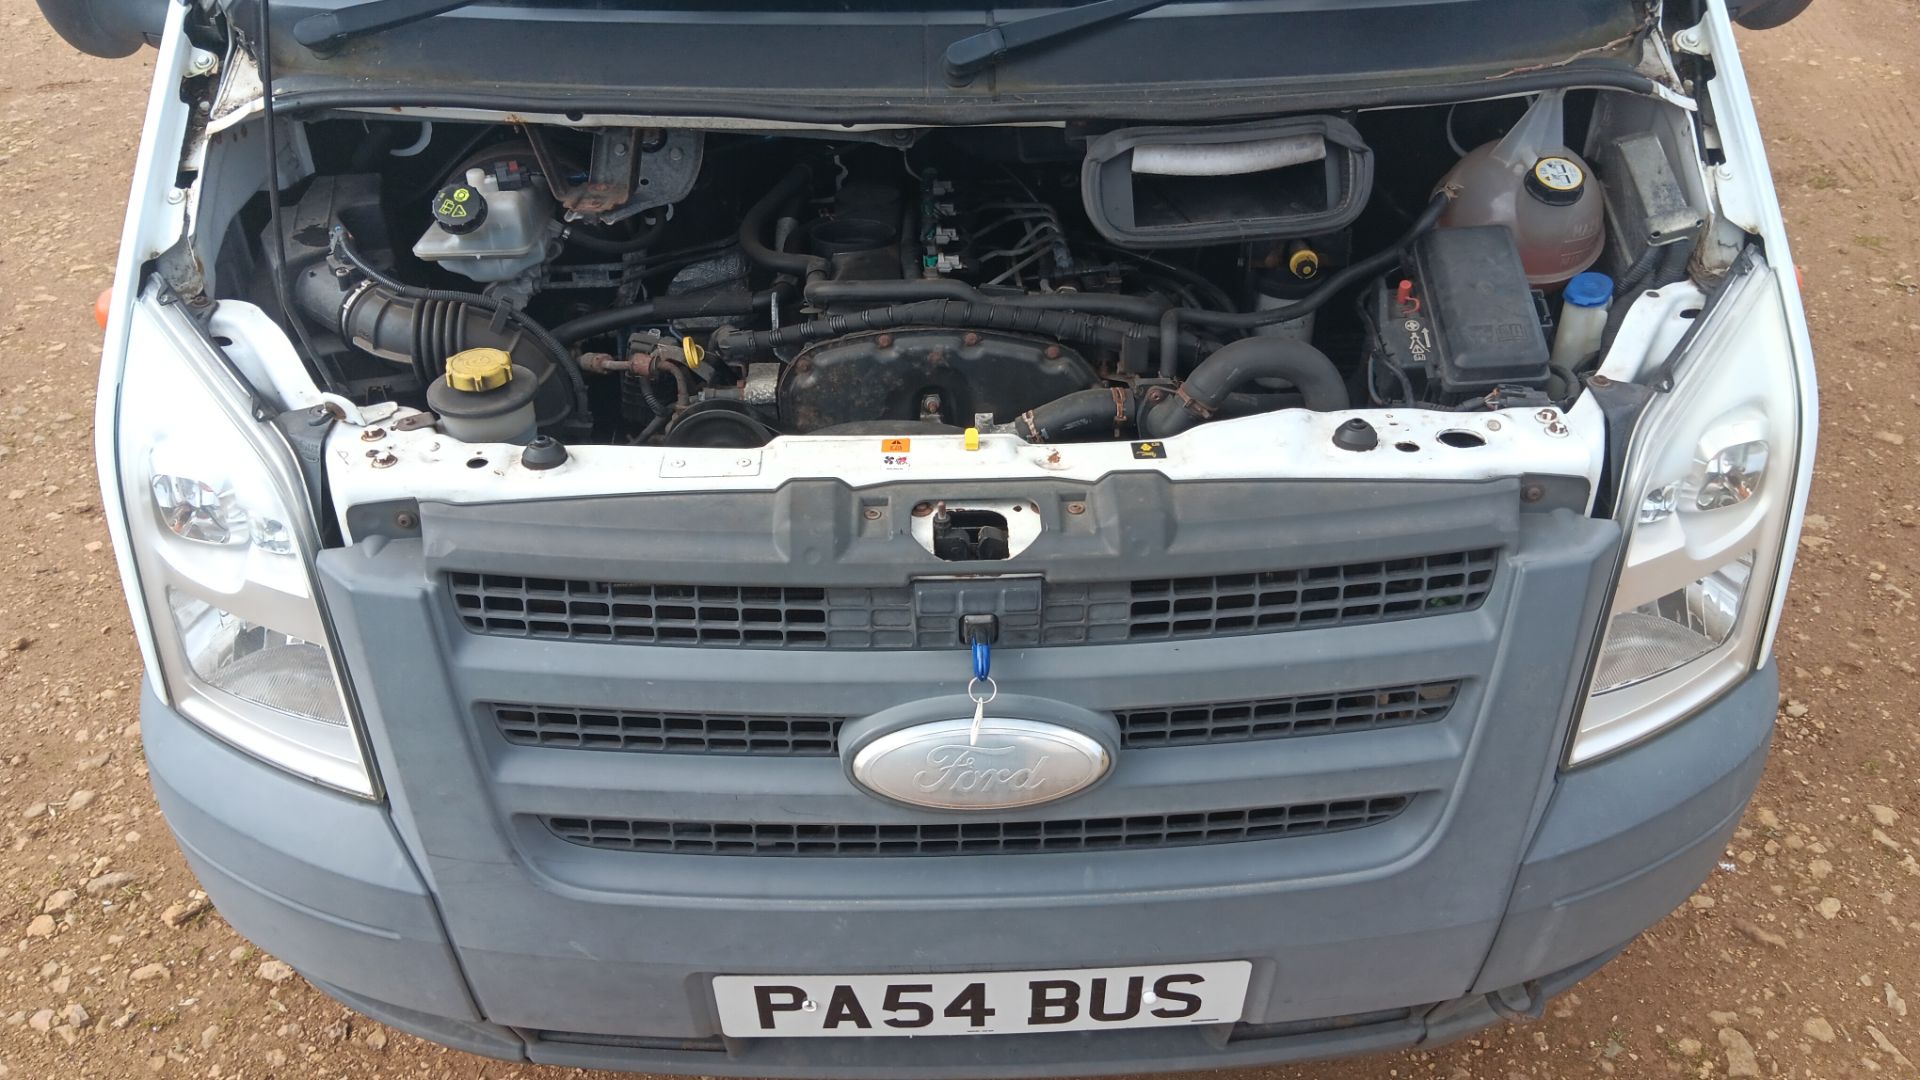 Ford Transit 140 T430 17S RWD 17 Seat Minibus, registration PA54 BUS (formally WK59 URZ), odometer - Image 27 of 30